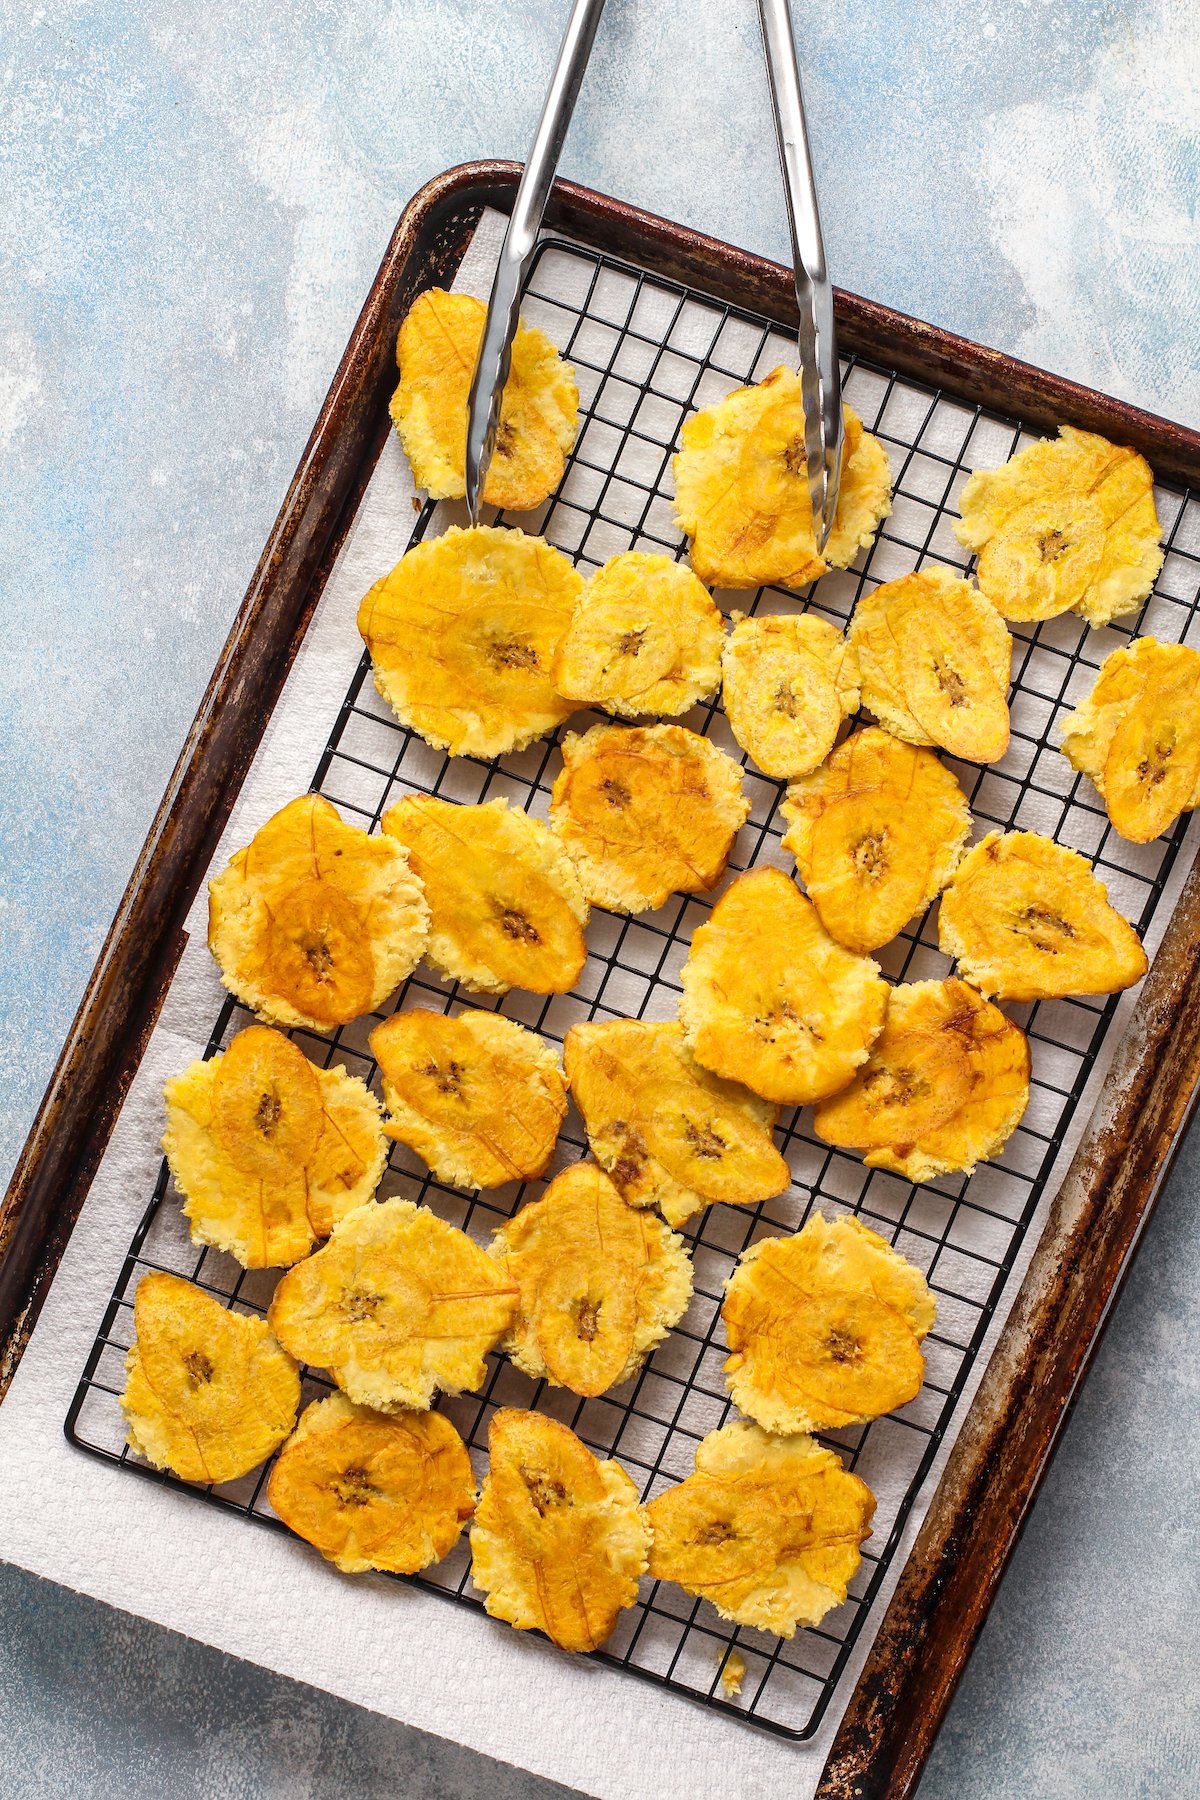 Smashed and fried plantains on a rack draining over paper towels.